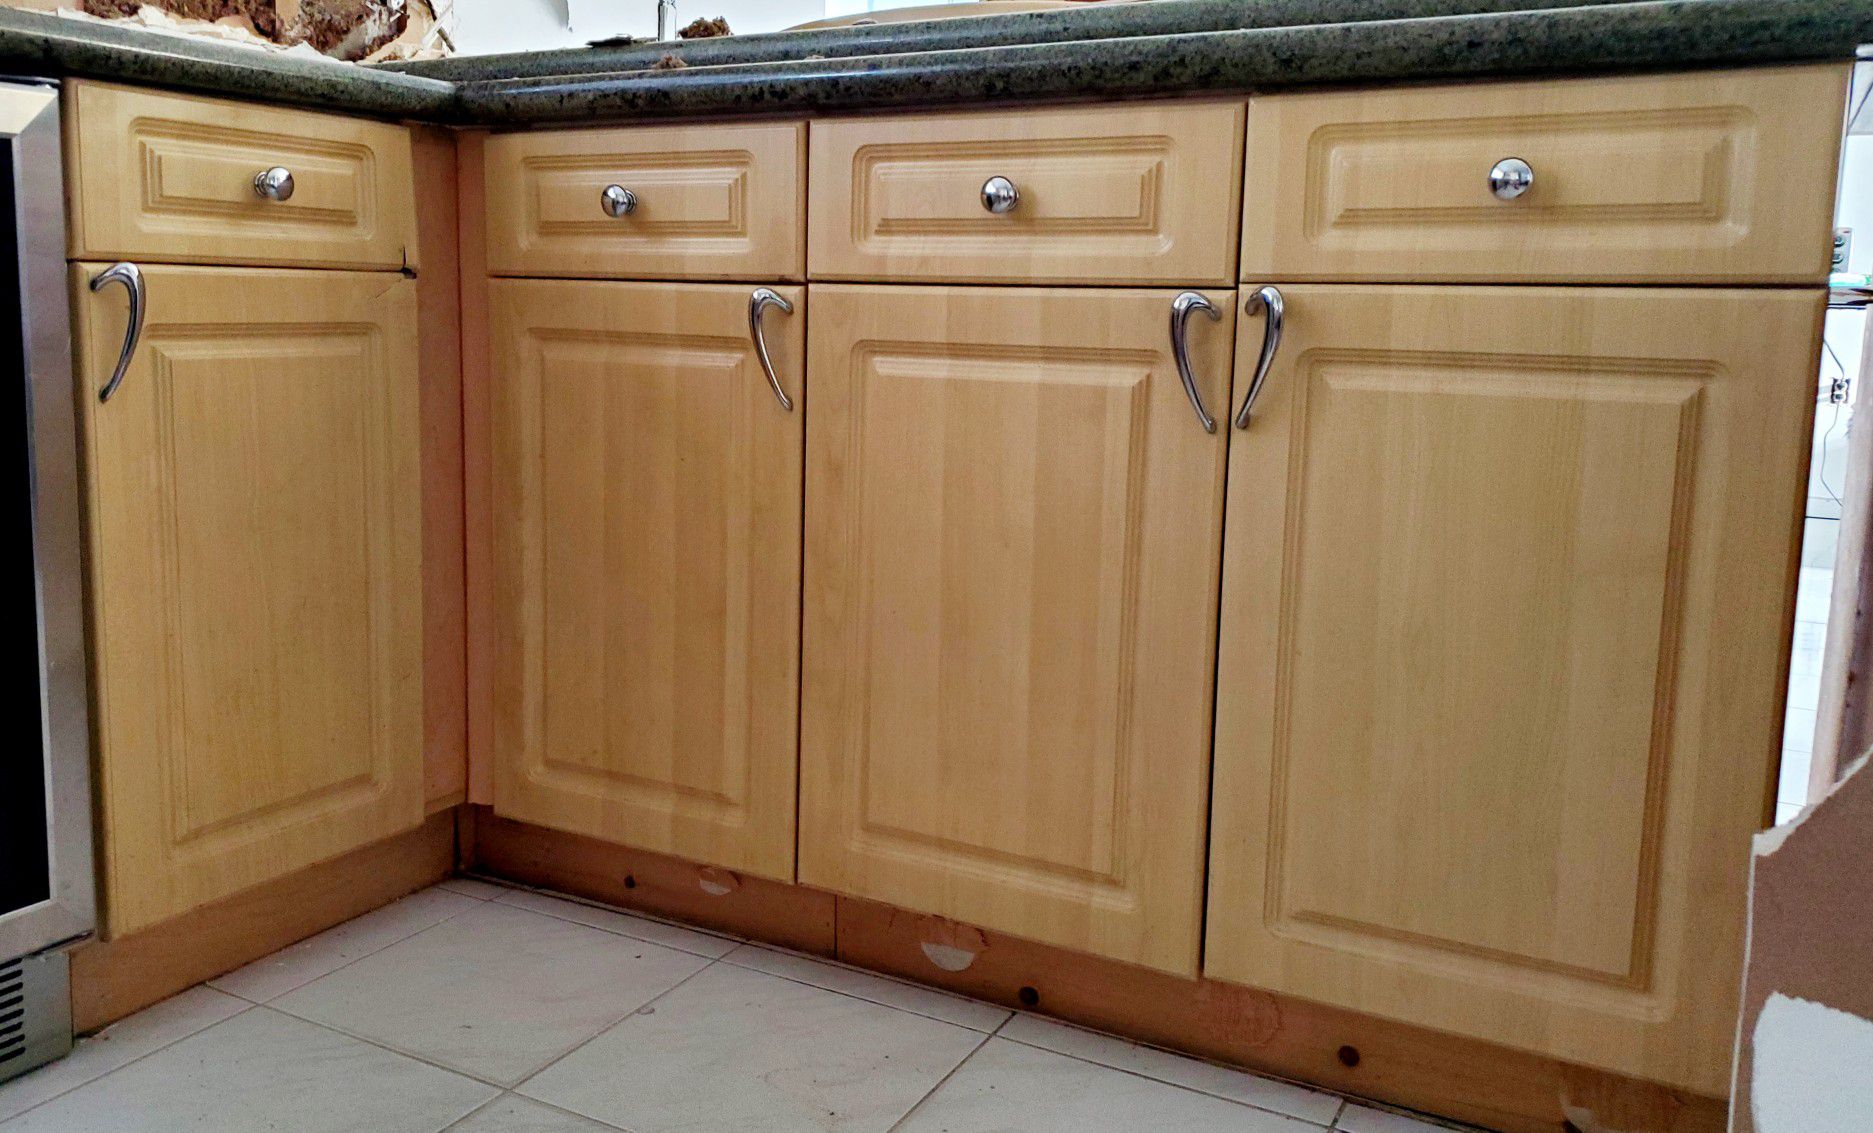 Bottom kitchen cabinets with granit counter tops